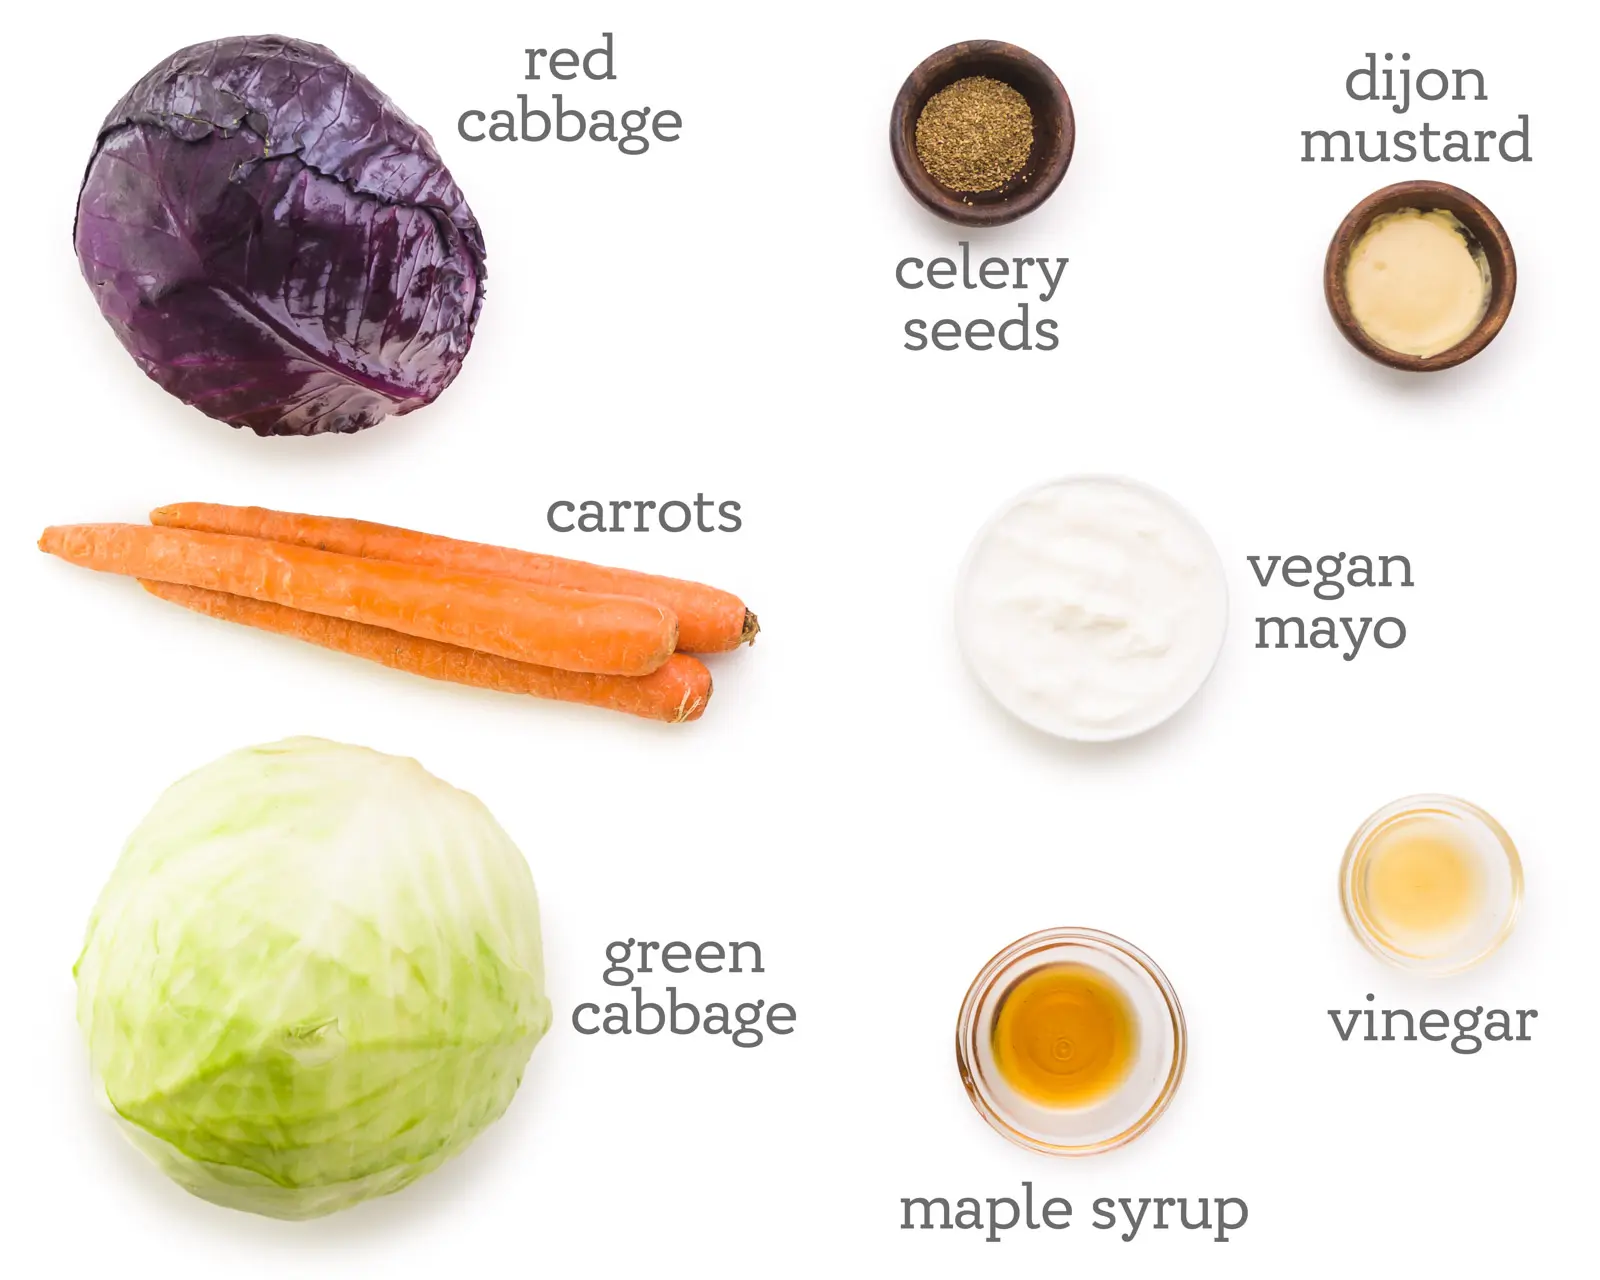 Ingredients are laid out on a table. The labels next to them read, celery seeds, dijon mustard, vegan mayo, vinegar, maple syrup, green cabbage, carrots, and red cabbage.